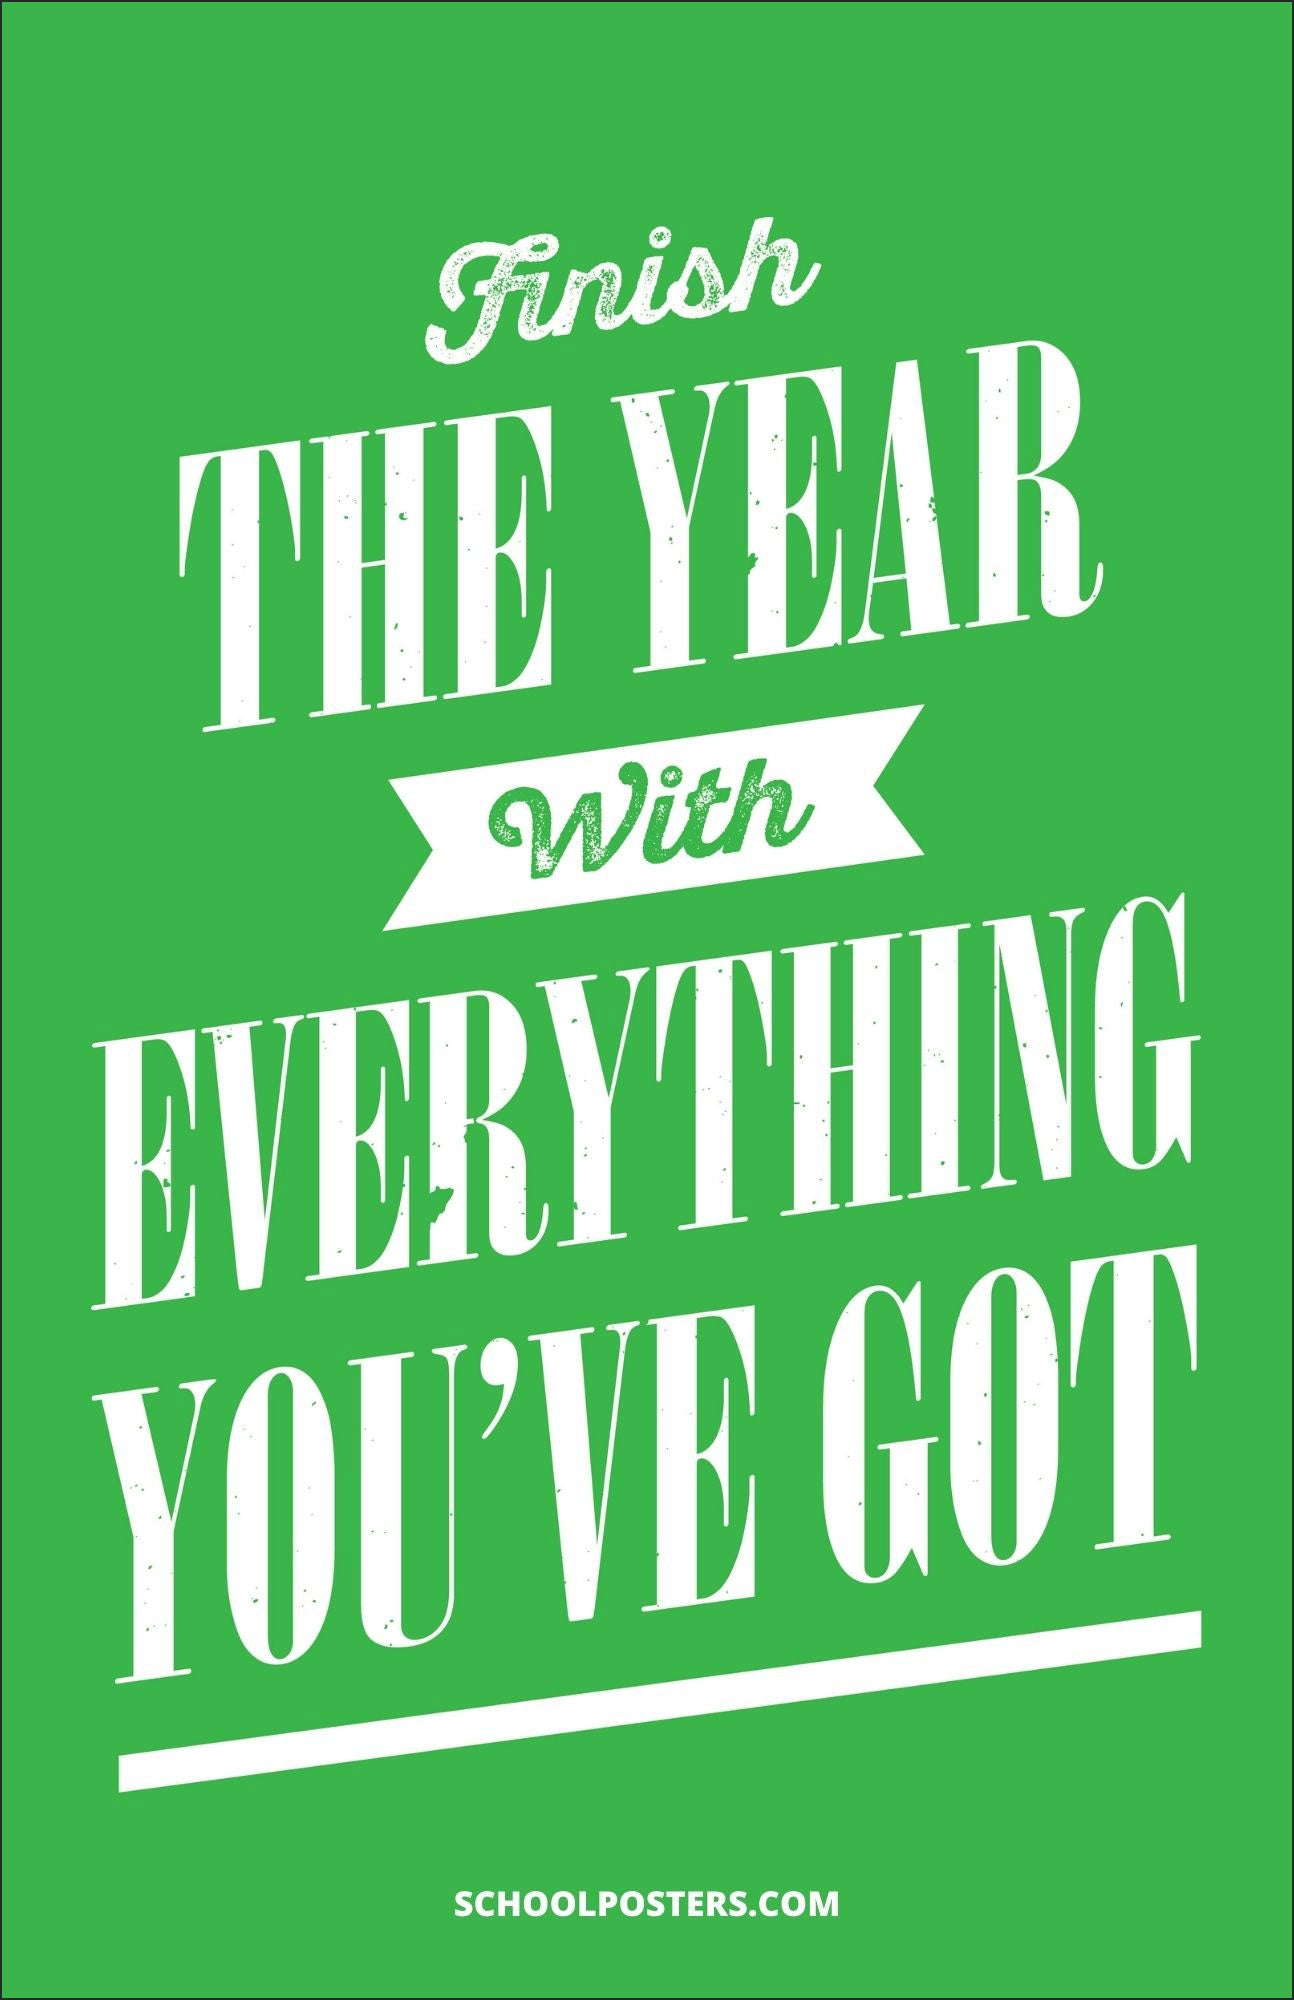 Everything You've Got Poster